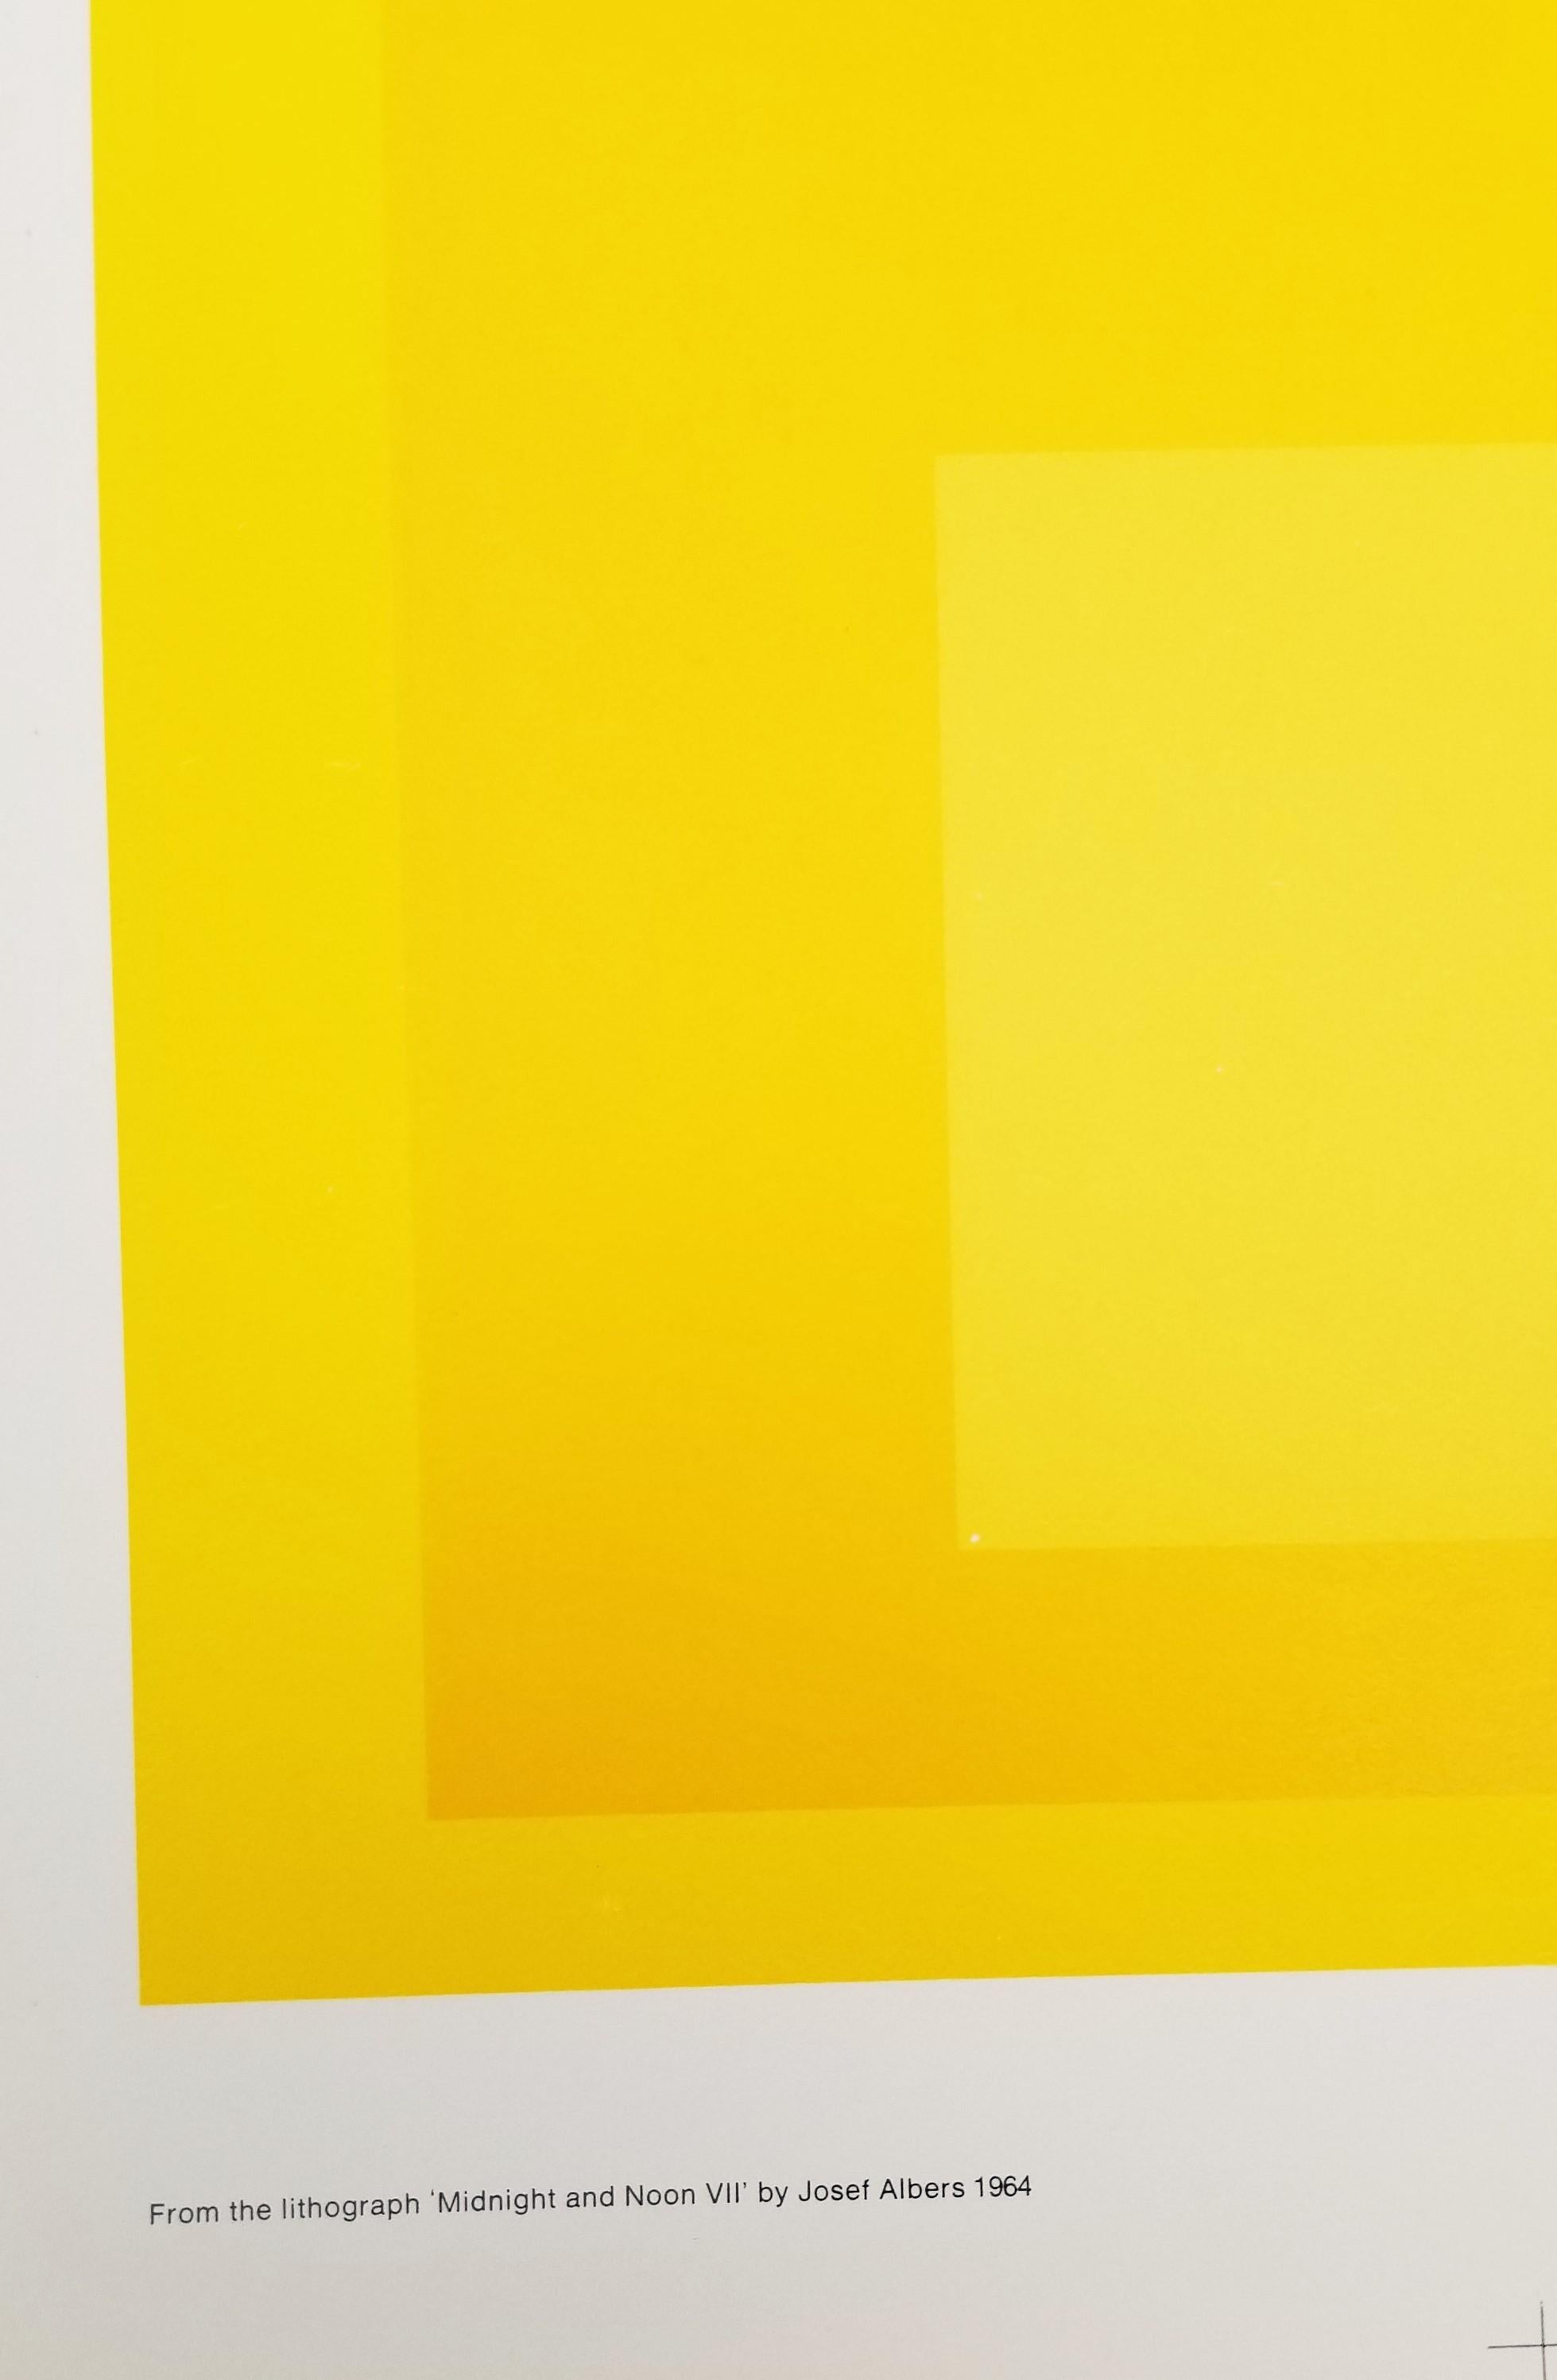 Josef Albers : 25 Years of Graphic Work (Midnight and Noon VII) Poster /// Square en vente 11